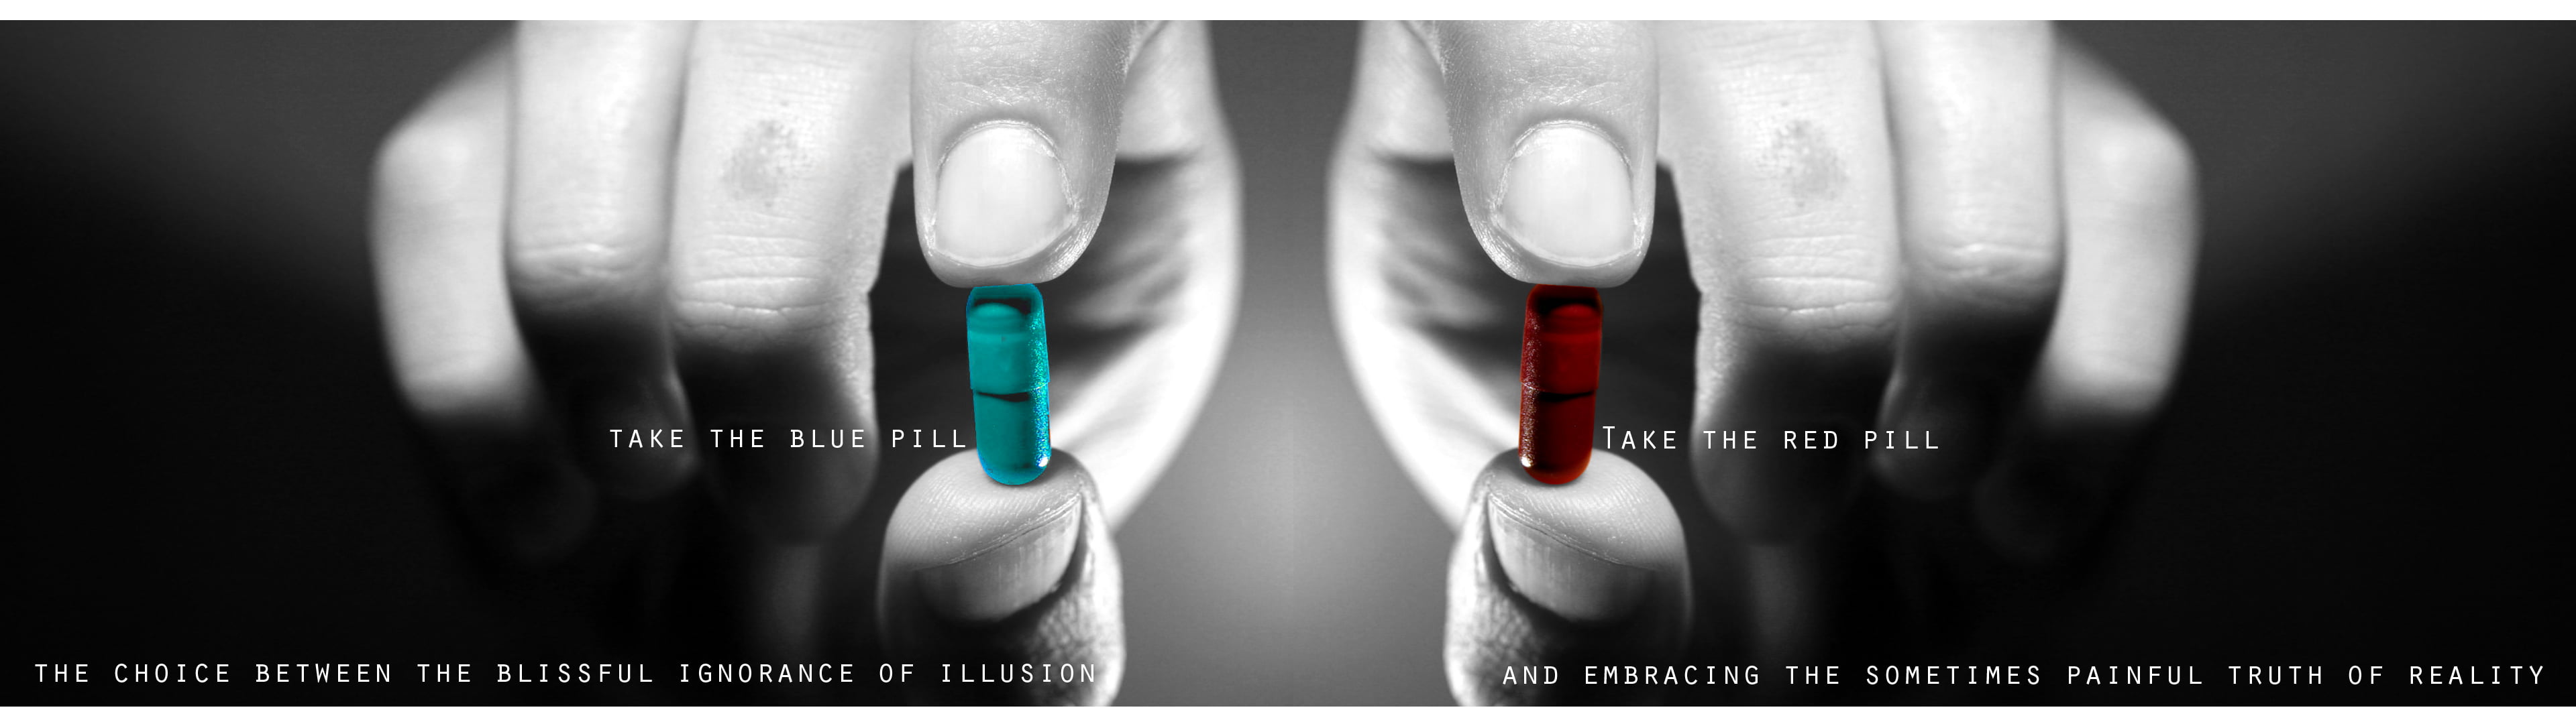 Take the blue pill and take red pill HD wallpaper | Wallpaper